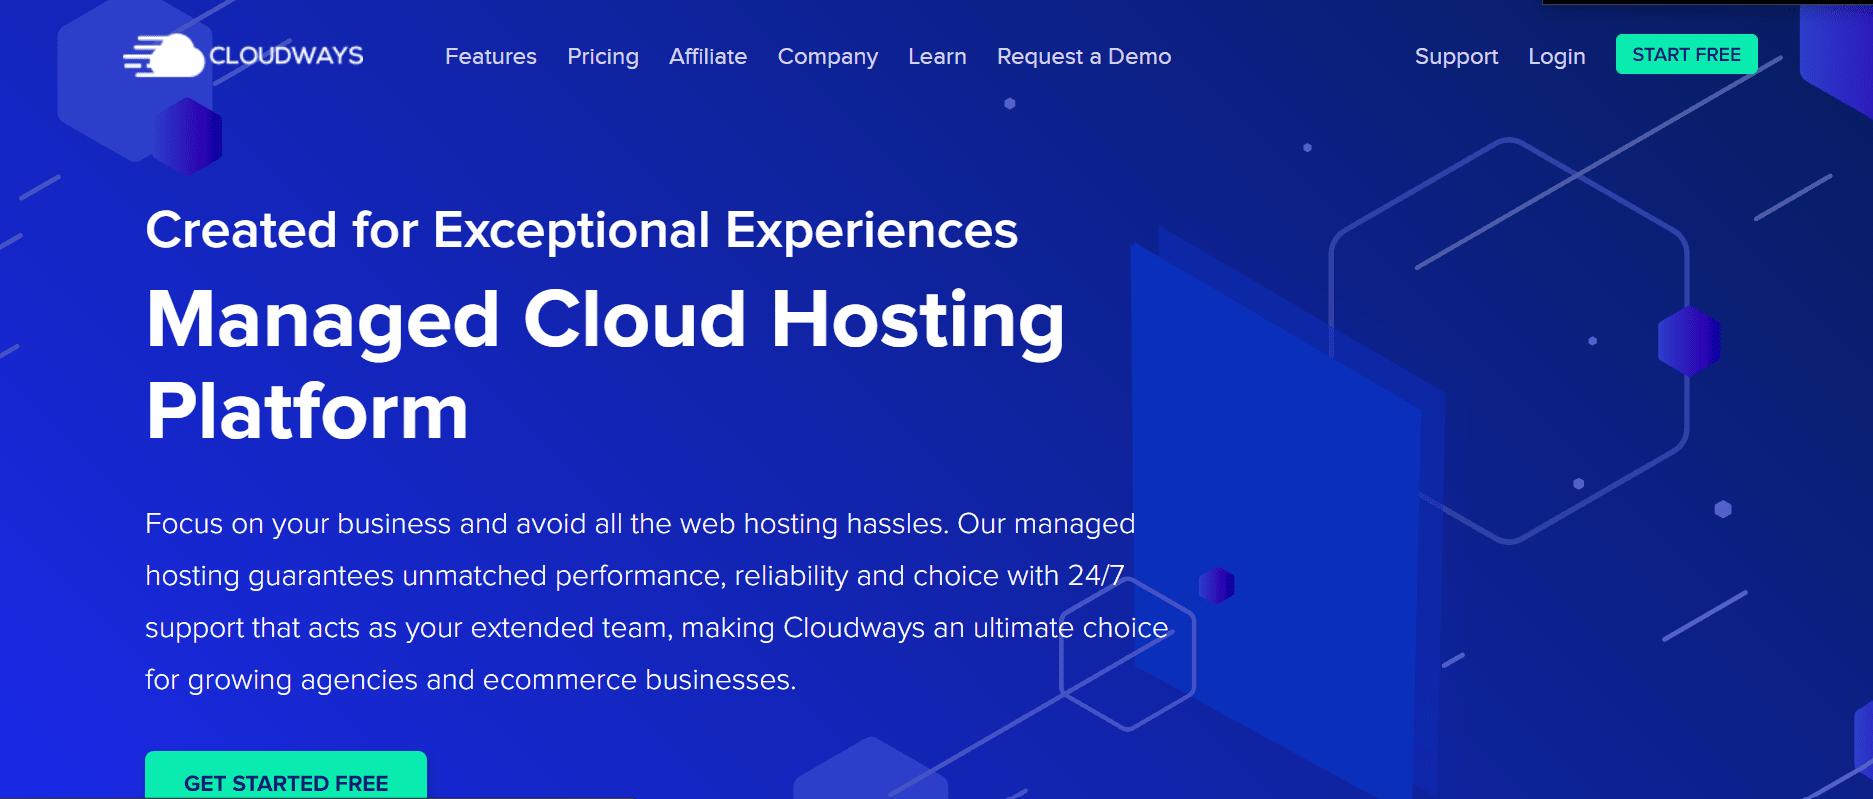 cloudways-overview-Recurring Affiliate Programs